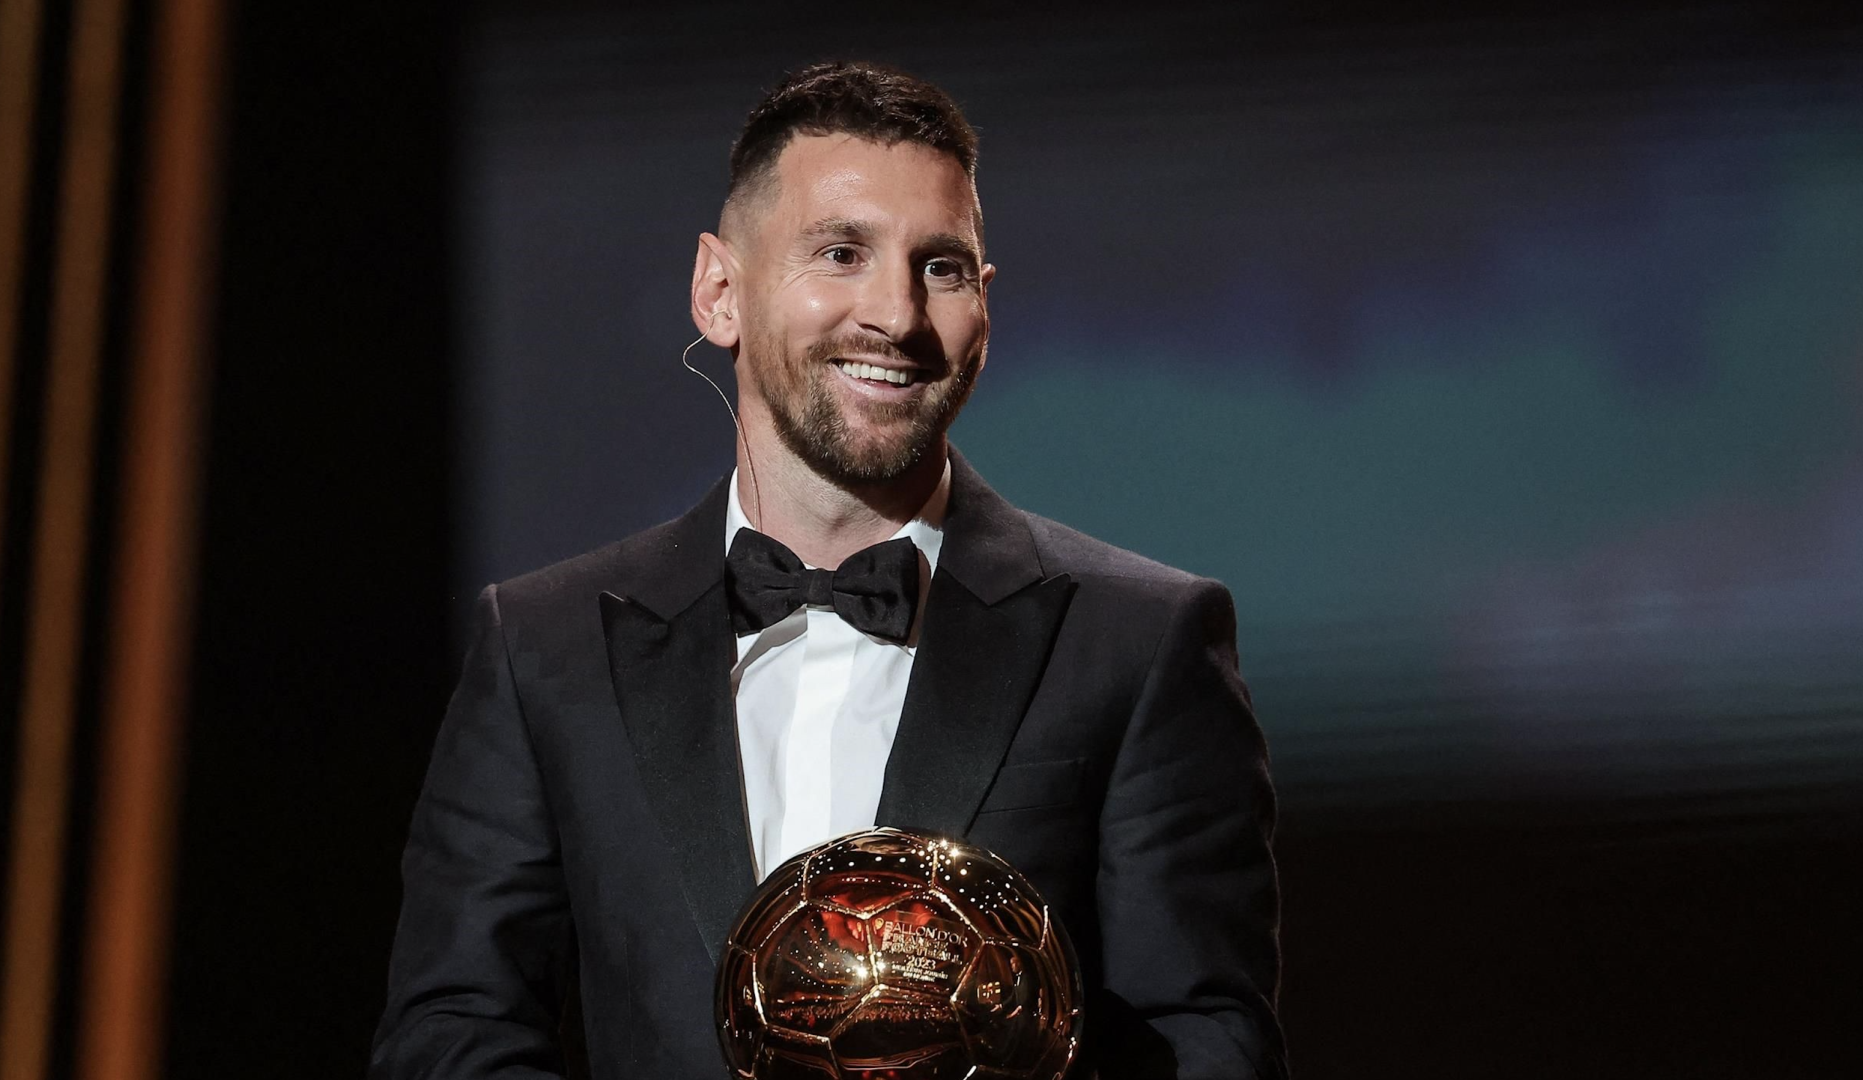 lionel messi: Argentina's Lionel Messi clinches eighth Ballon d'Or, leaving Cristiano  Ronaldo behind - The Economic Times